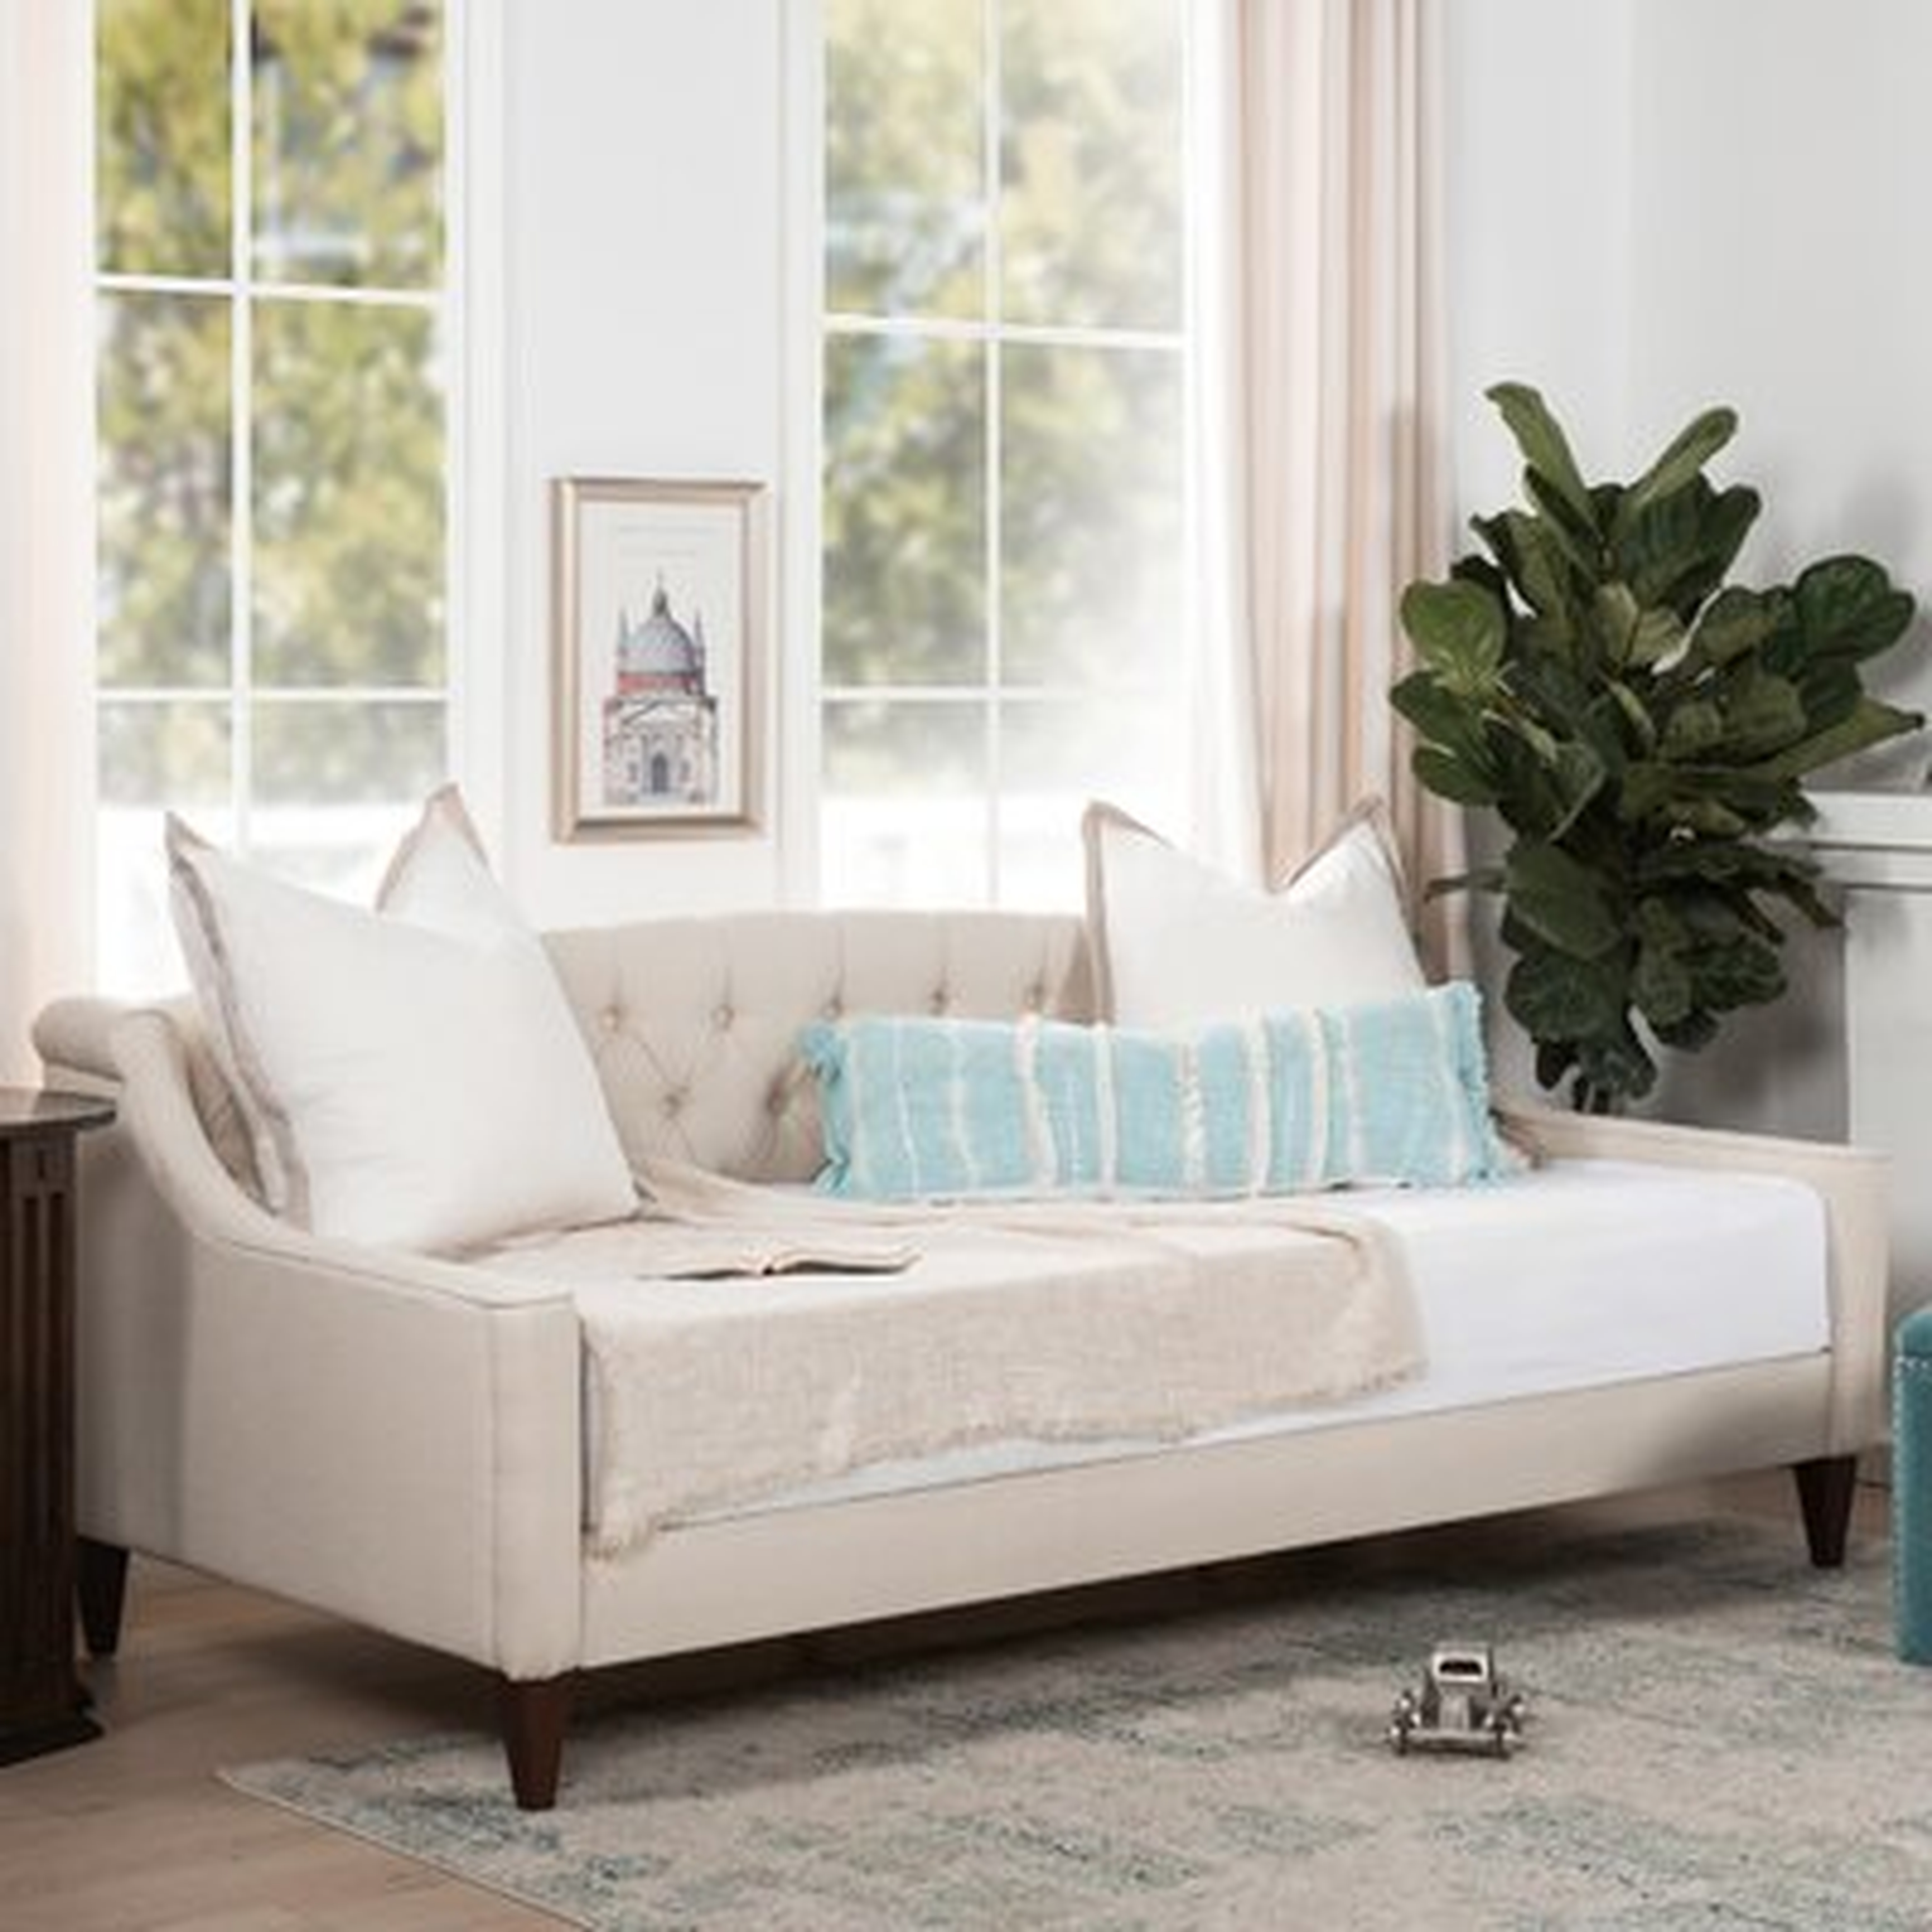 Gilmore Twin Daybed - Birch Lane